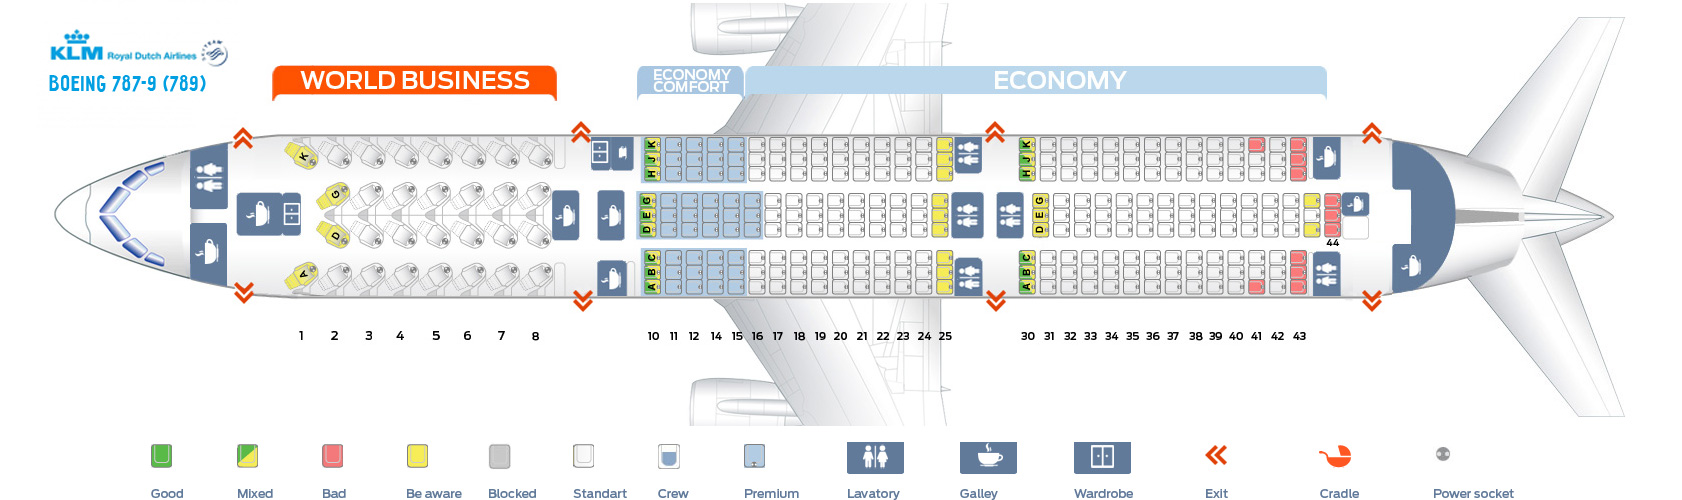 Seat map Boeing 7879 Dreamliner KLM. Best seats in the plane